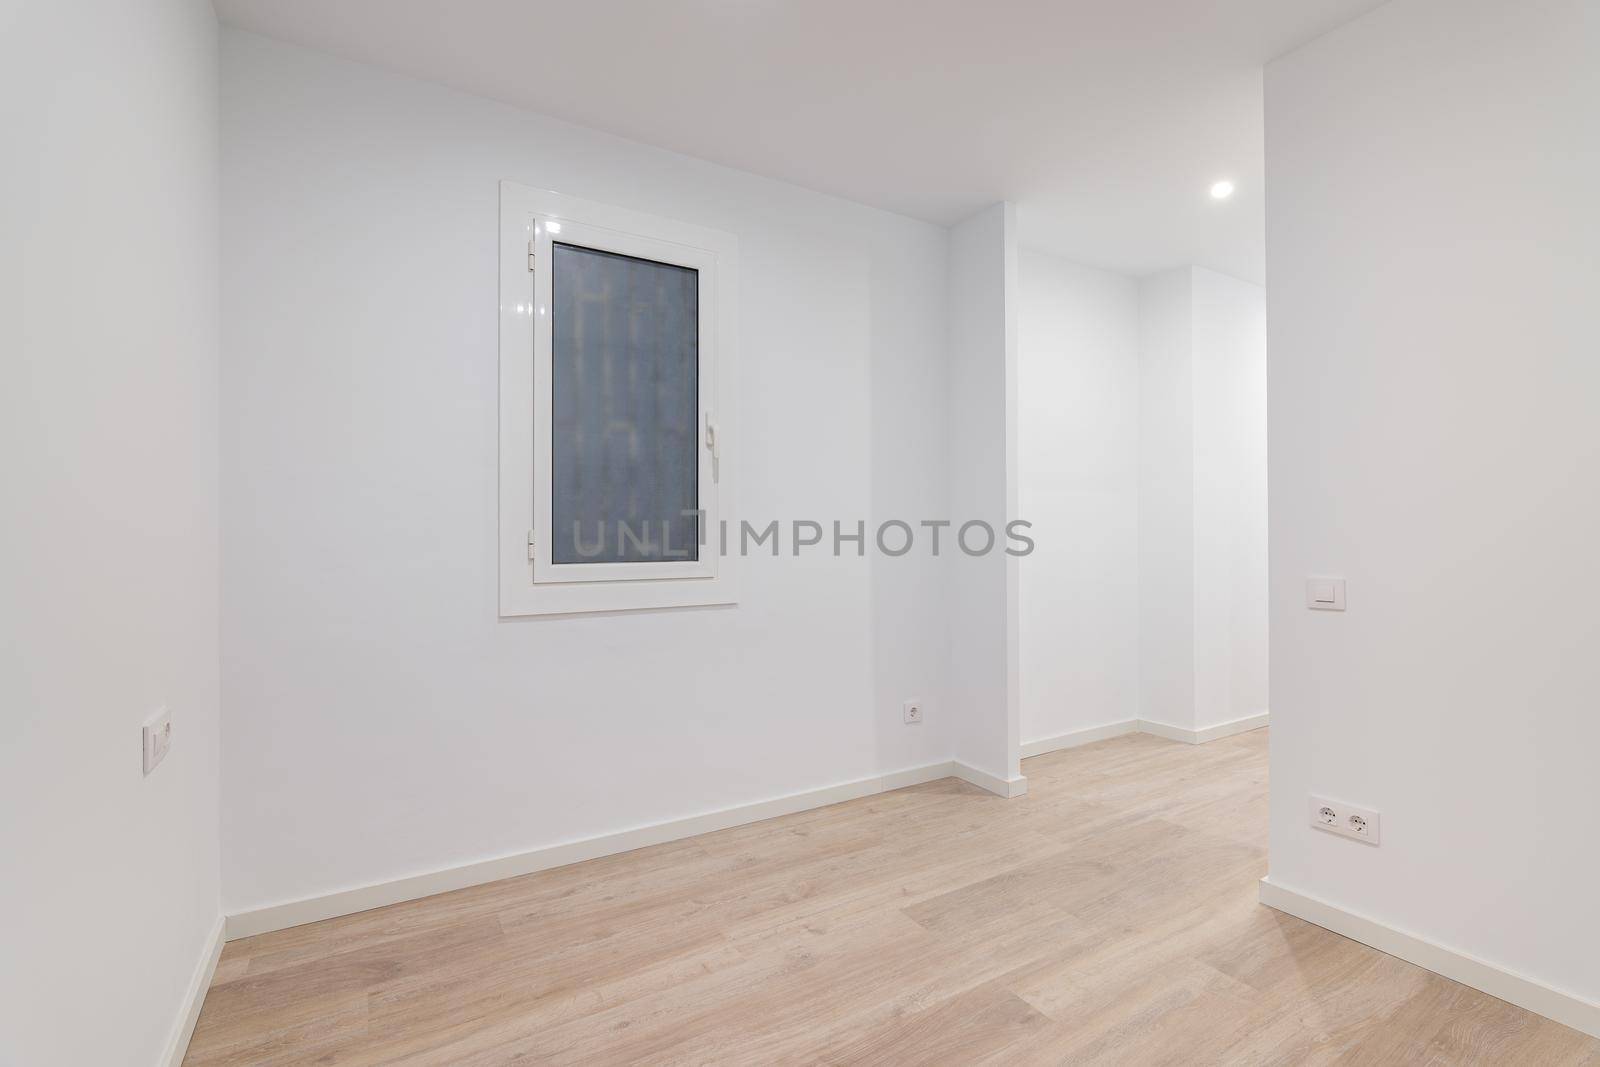 Empty white room with a window with a lattice. Modern apartment is after renovation